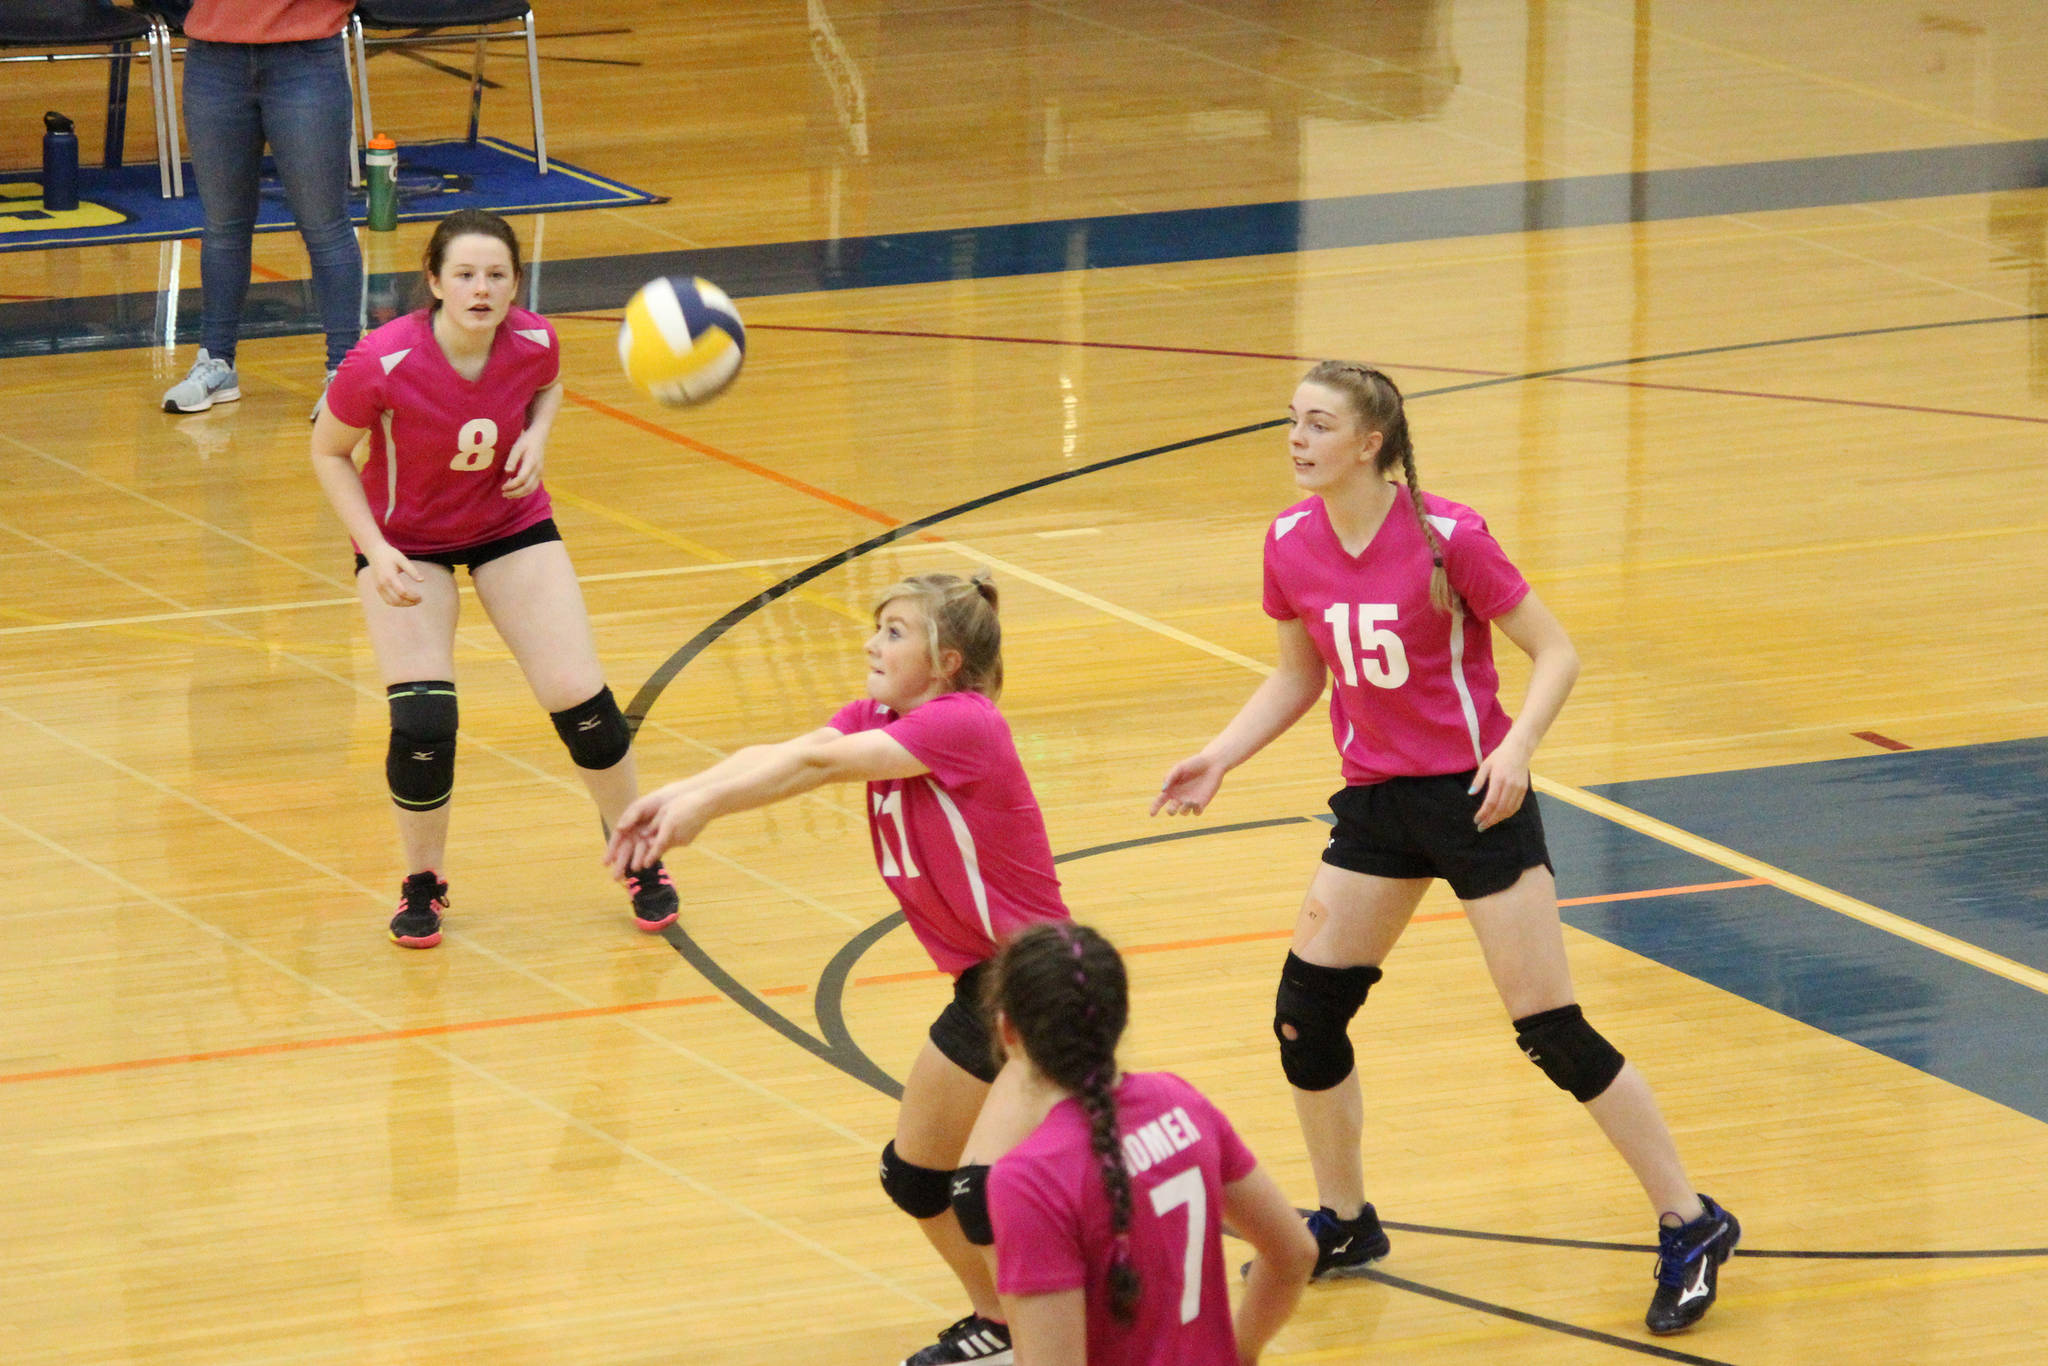 Sela Weisser digs a serve while her teammates prepare for their next move during their game against Soldotna High School on Tuesday, Oct. 9, 2018 at Homer High School in Homer, Alaska. (Photo by Megan Pacer/Homer News)